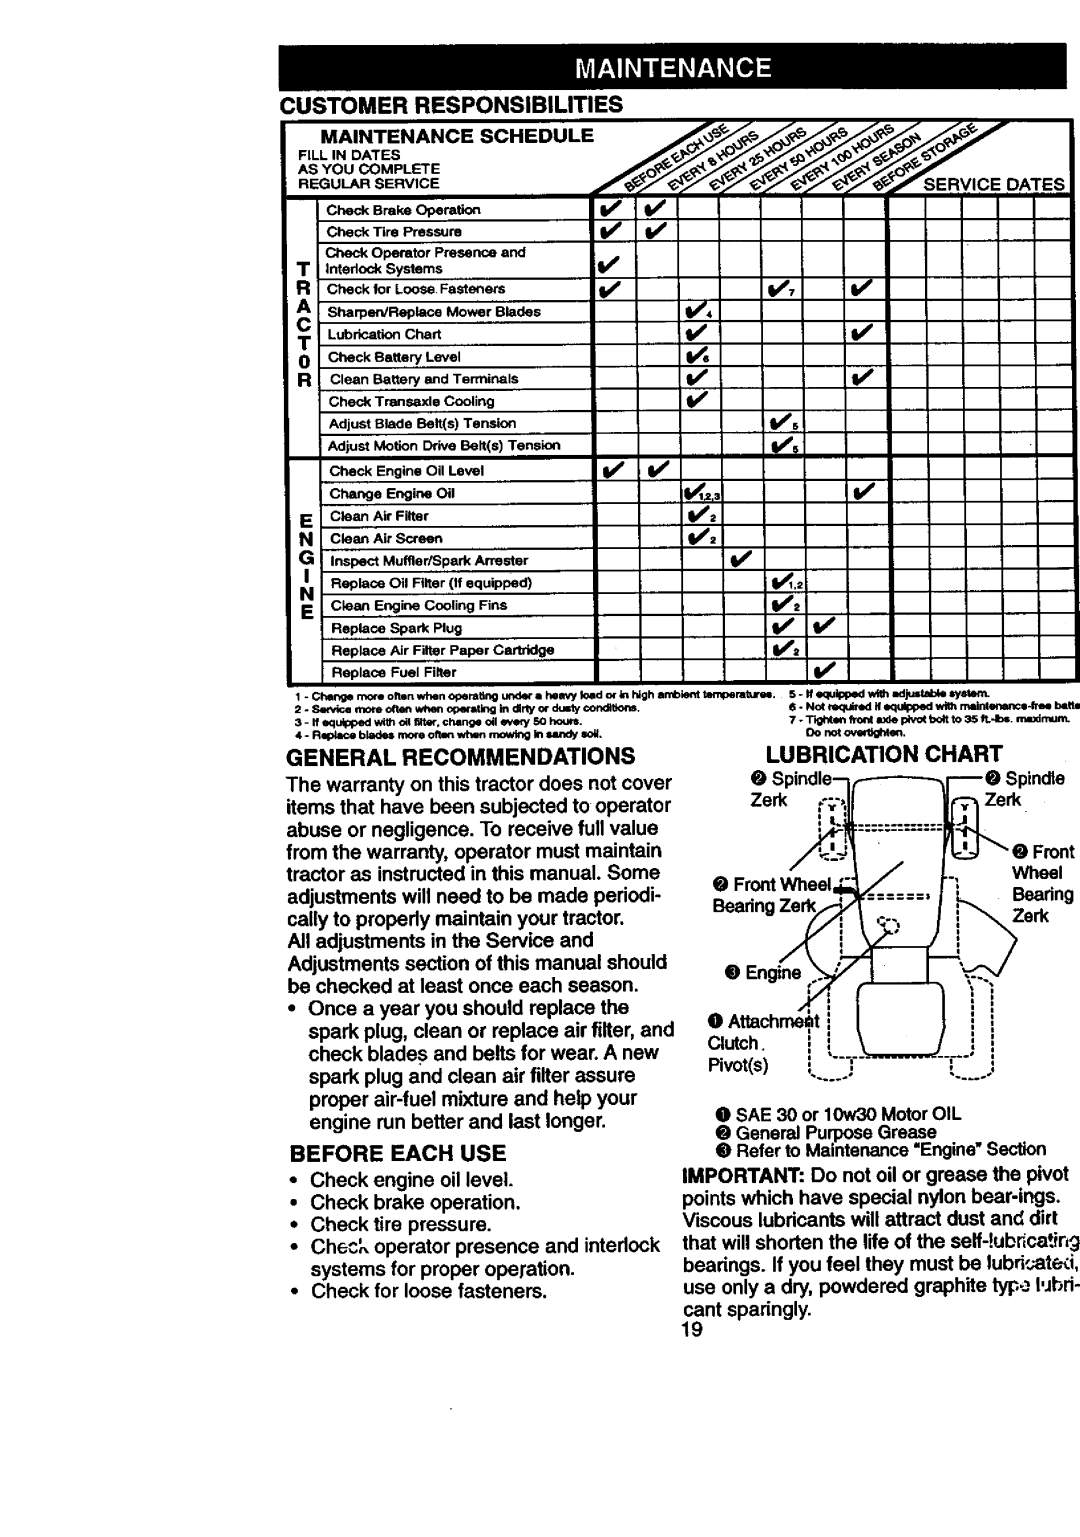 Craftsman 917.27084 manual Customer, Responsibilities, Lubrication Chart, • Once a year you should replace the, spark 